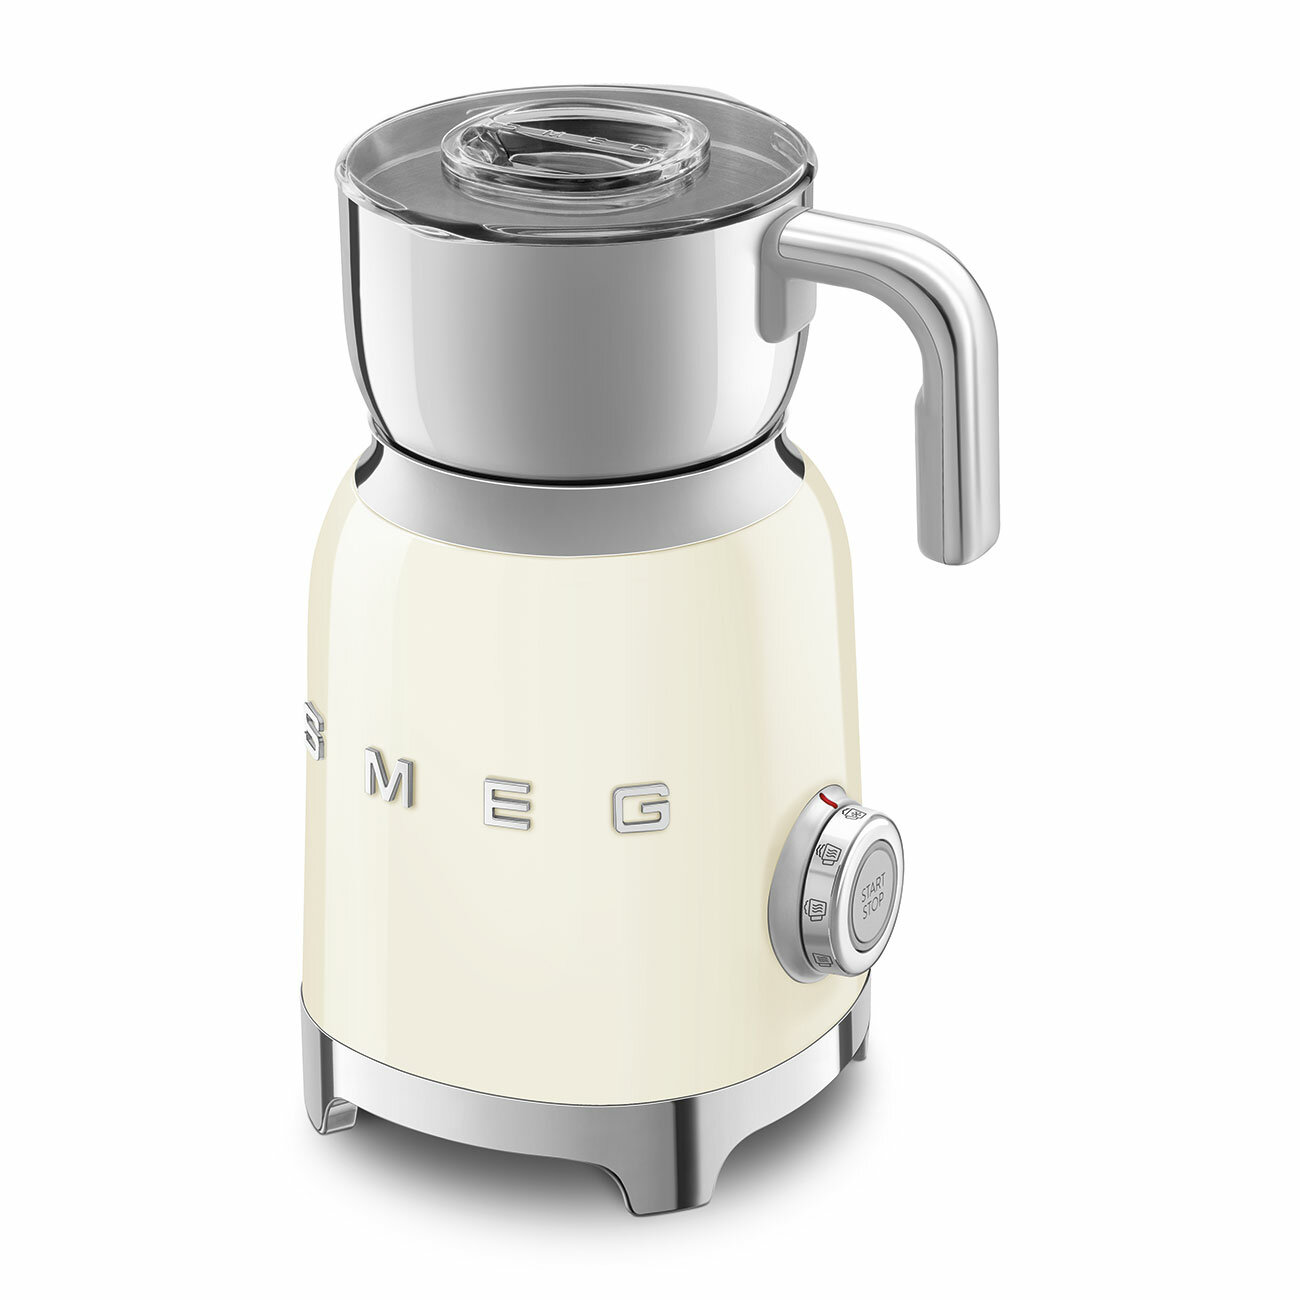 Milk Frother 50's Retro Style by Smeg - Dimensiva